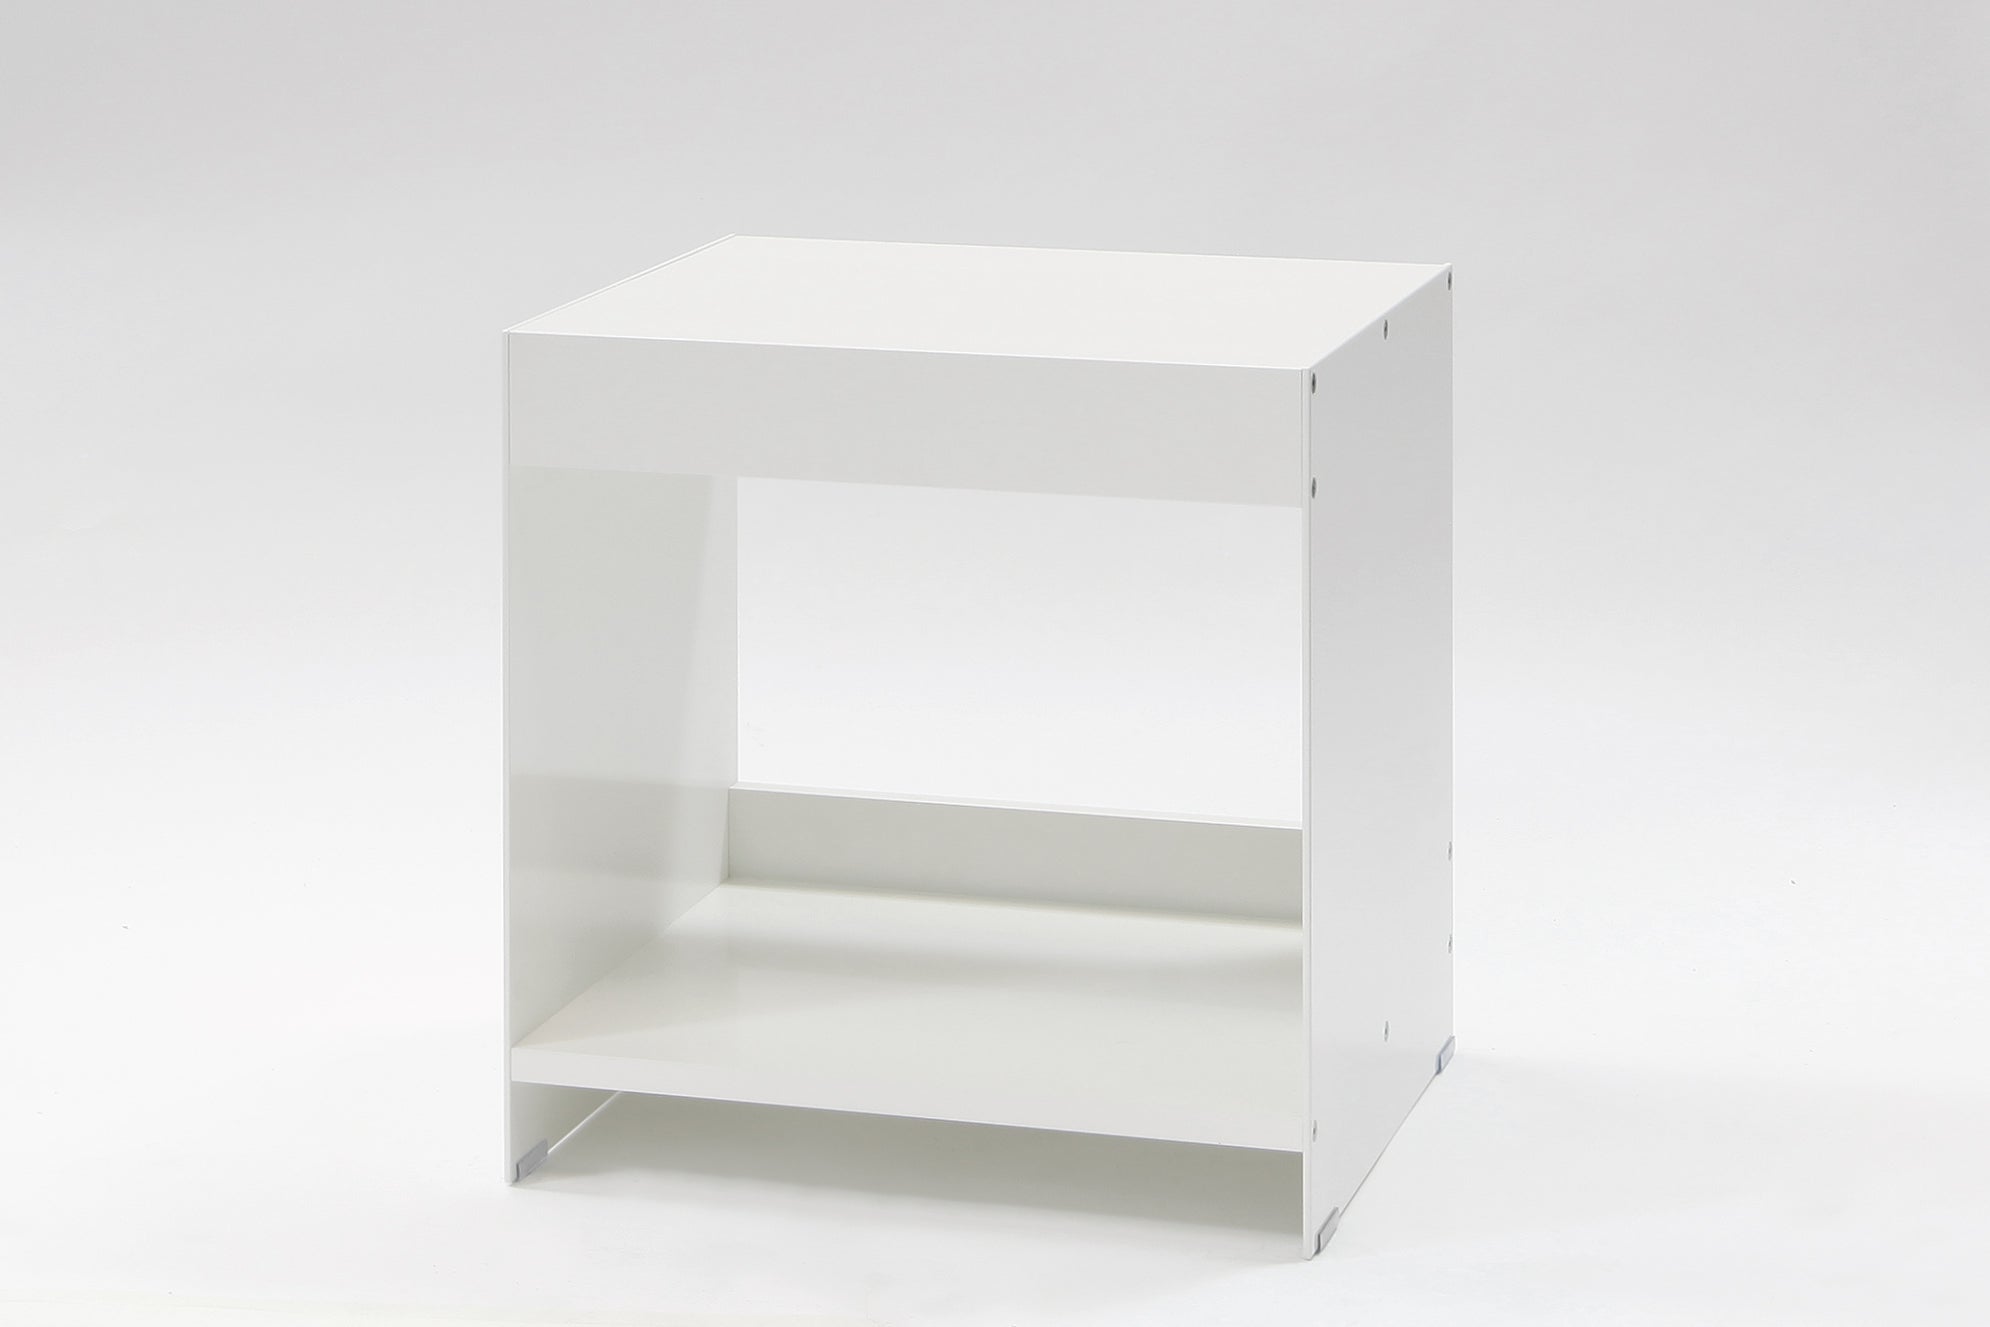 H1 aluminium side table by ON&ON available in white or black